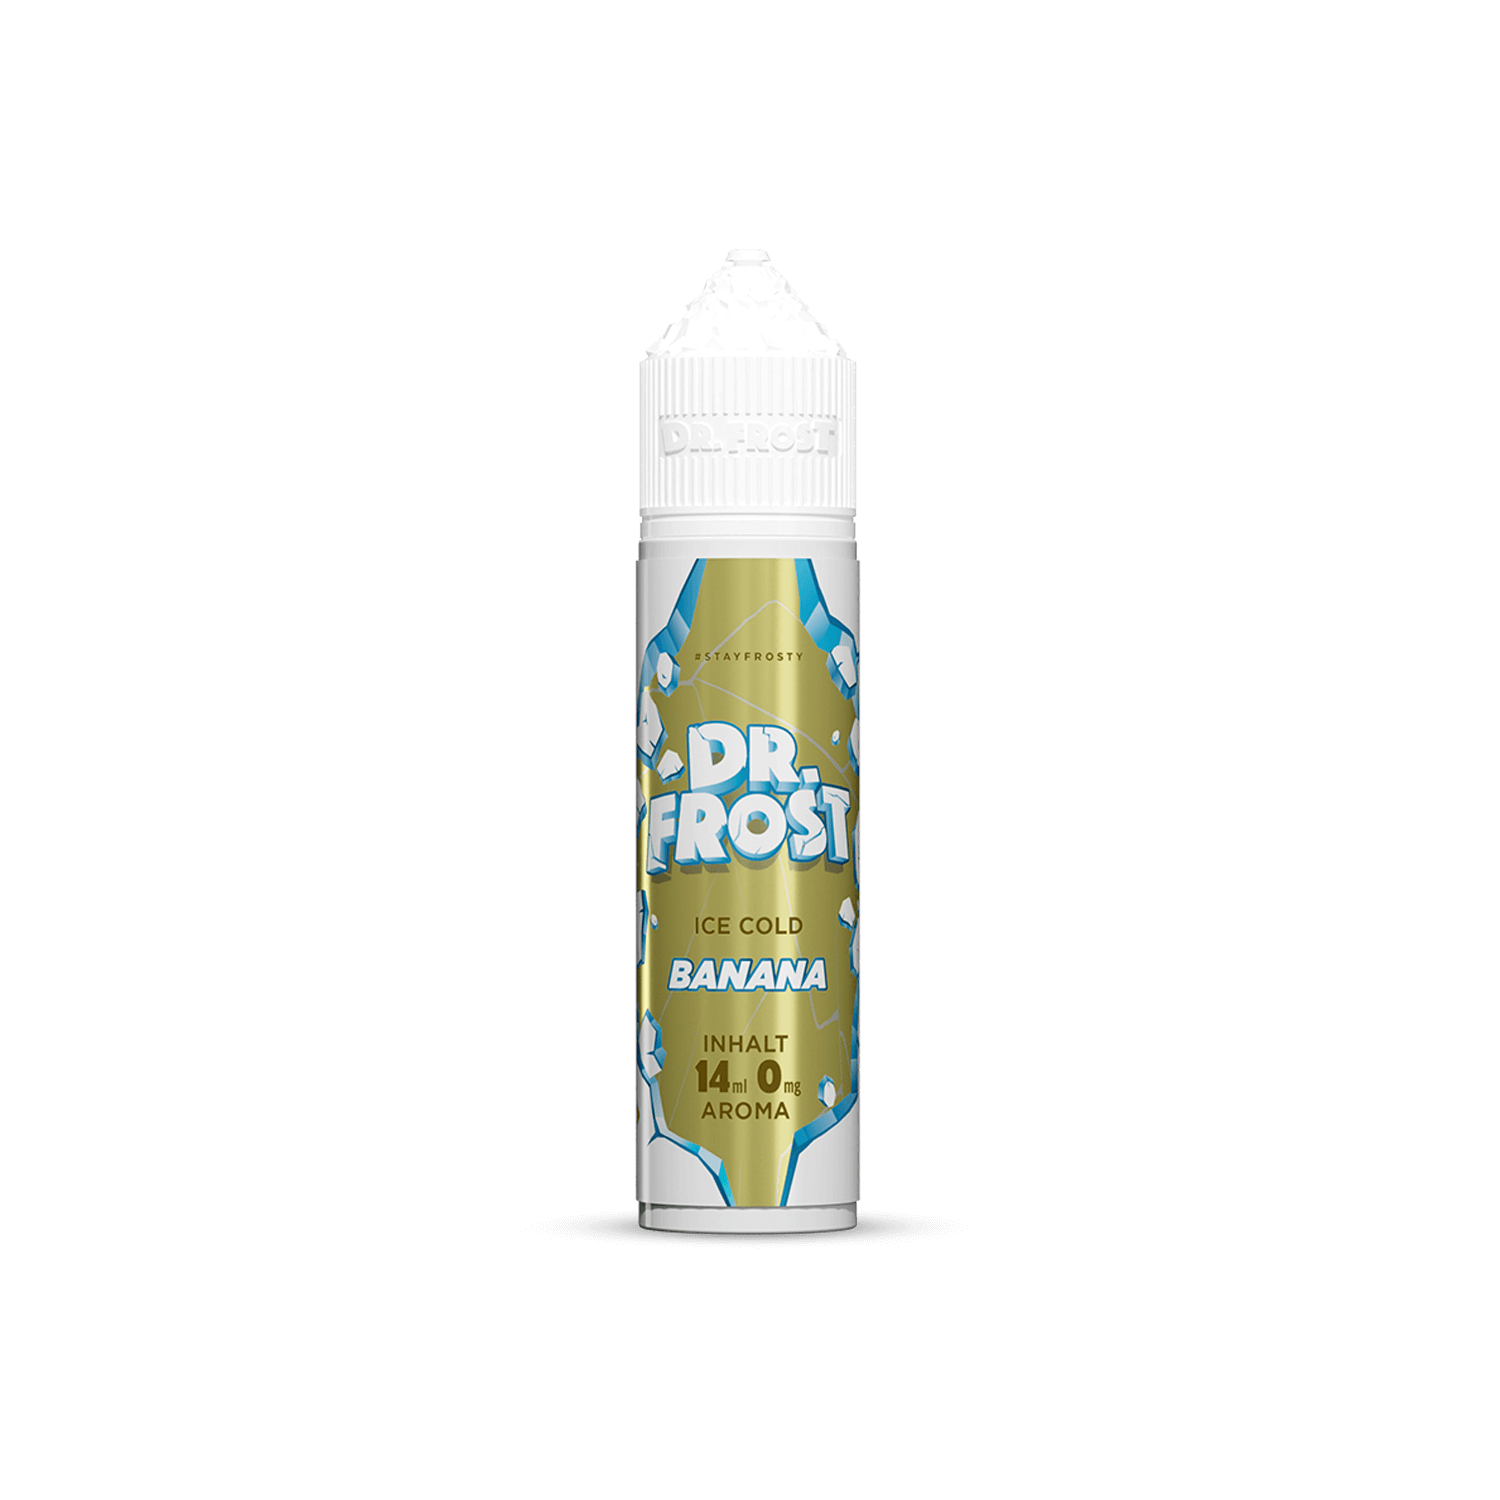 Dr. Frost - Ice Cold - Banana 14ml Aroma